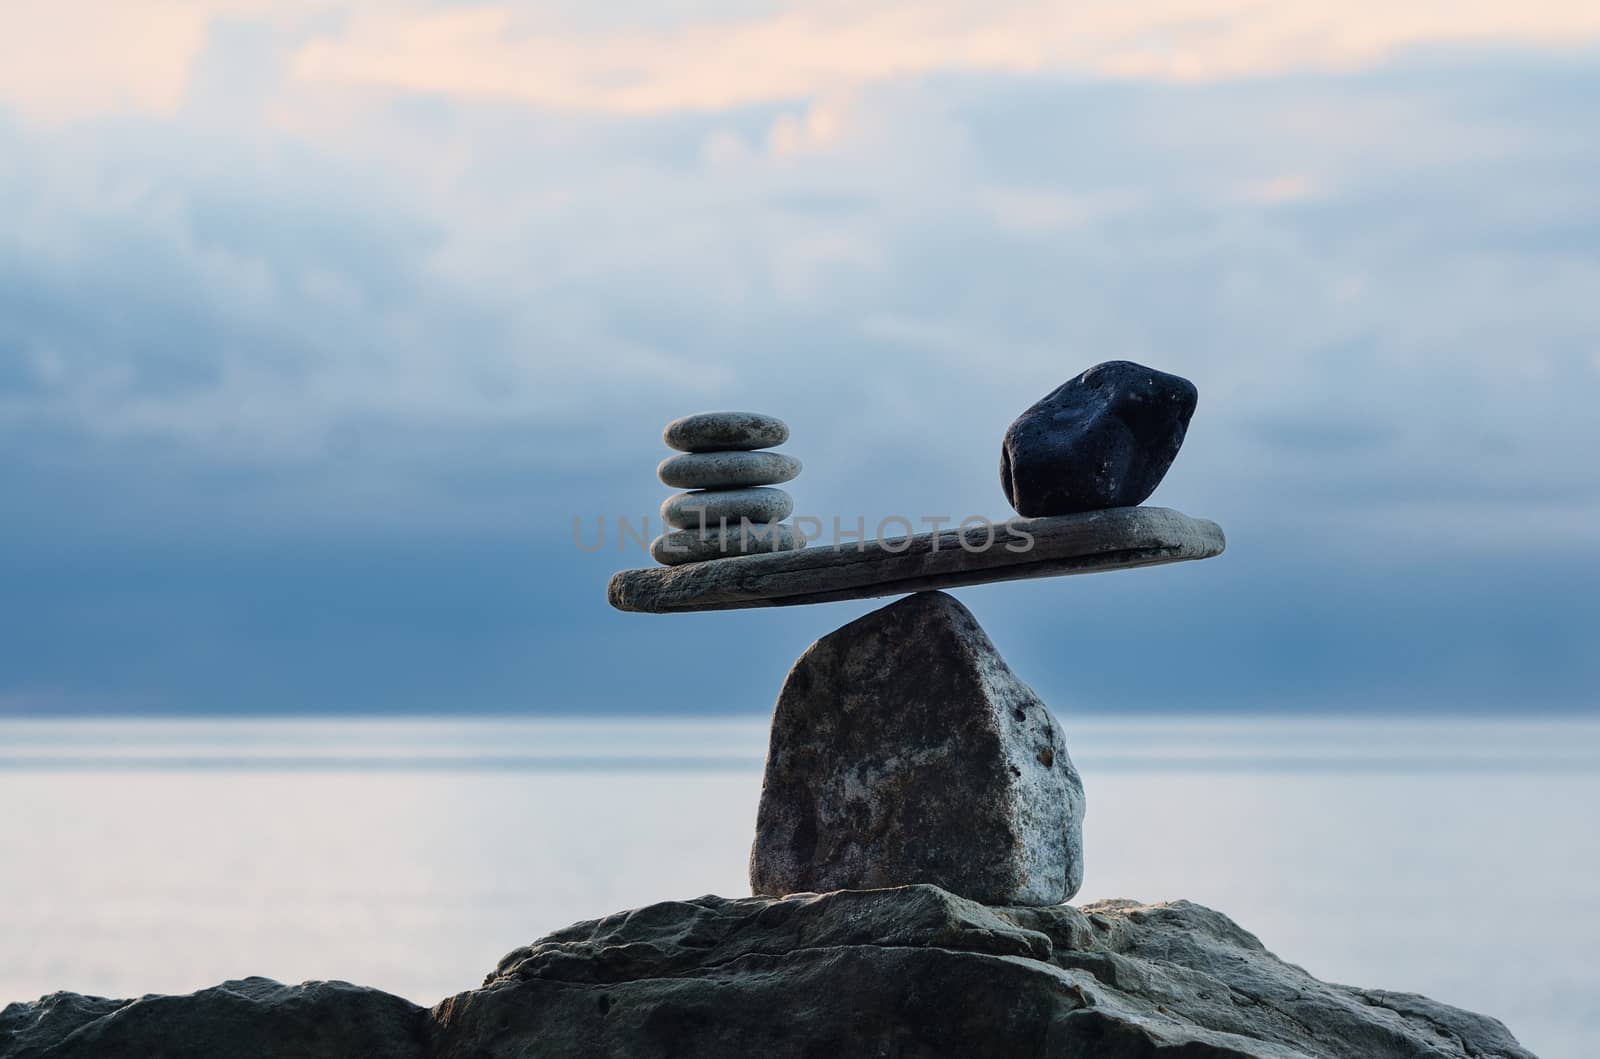 Symbol of scales is made of pebbles on the sea boulder